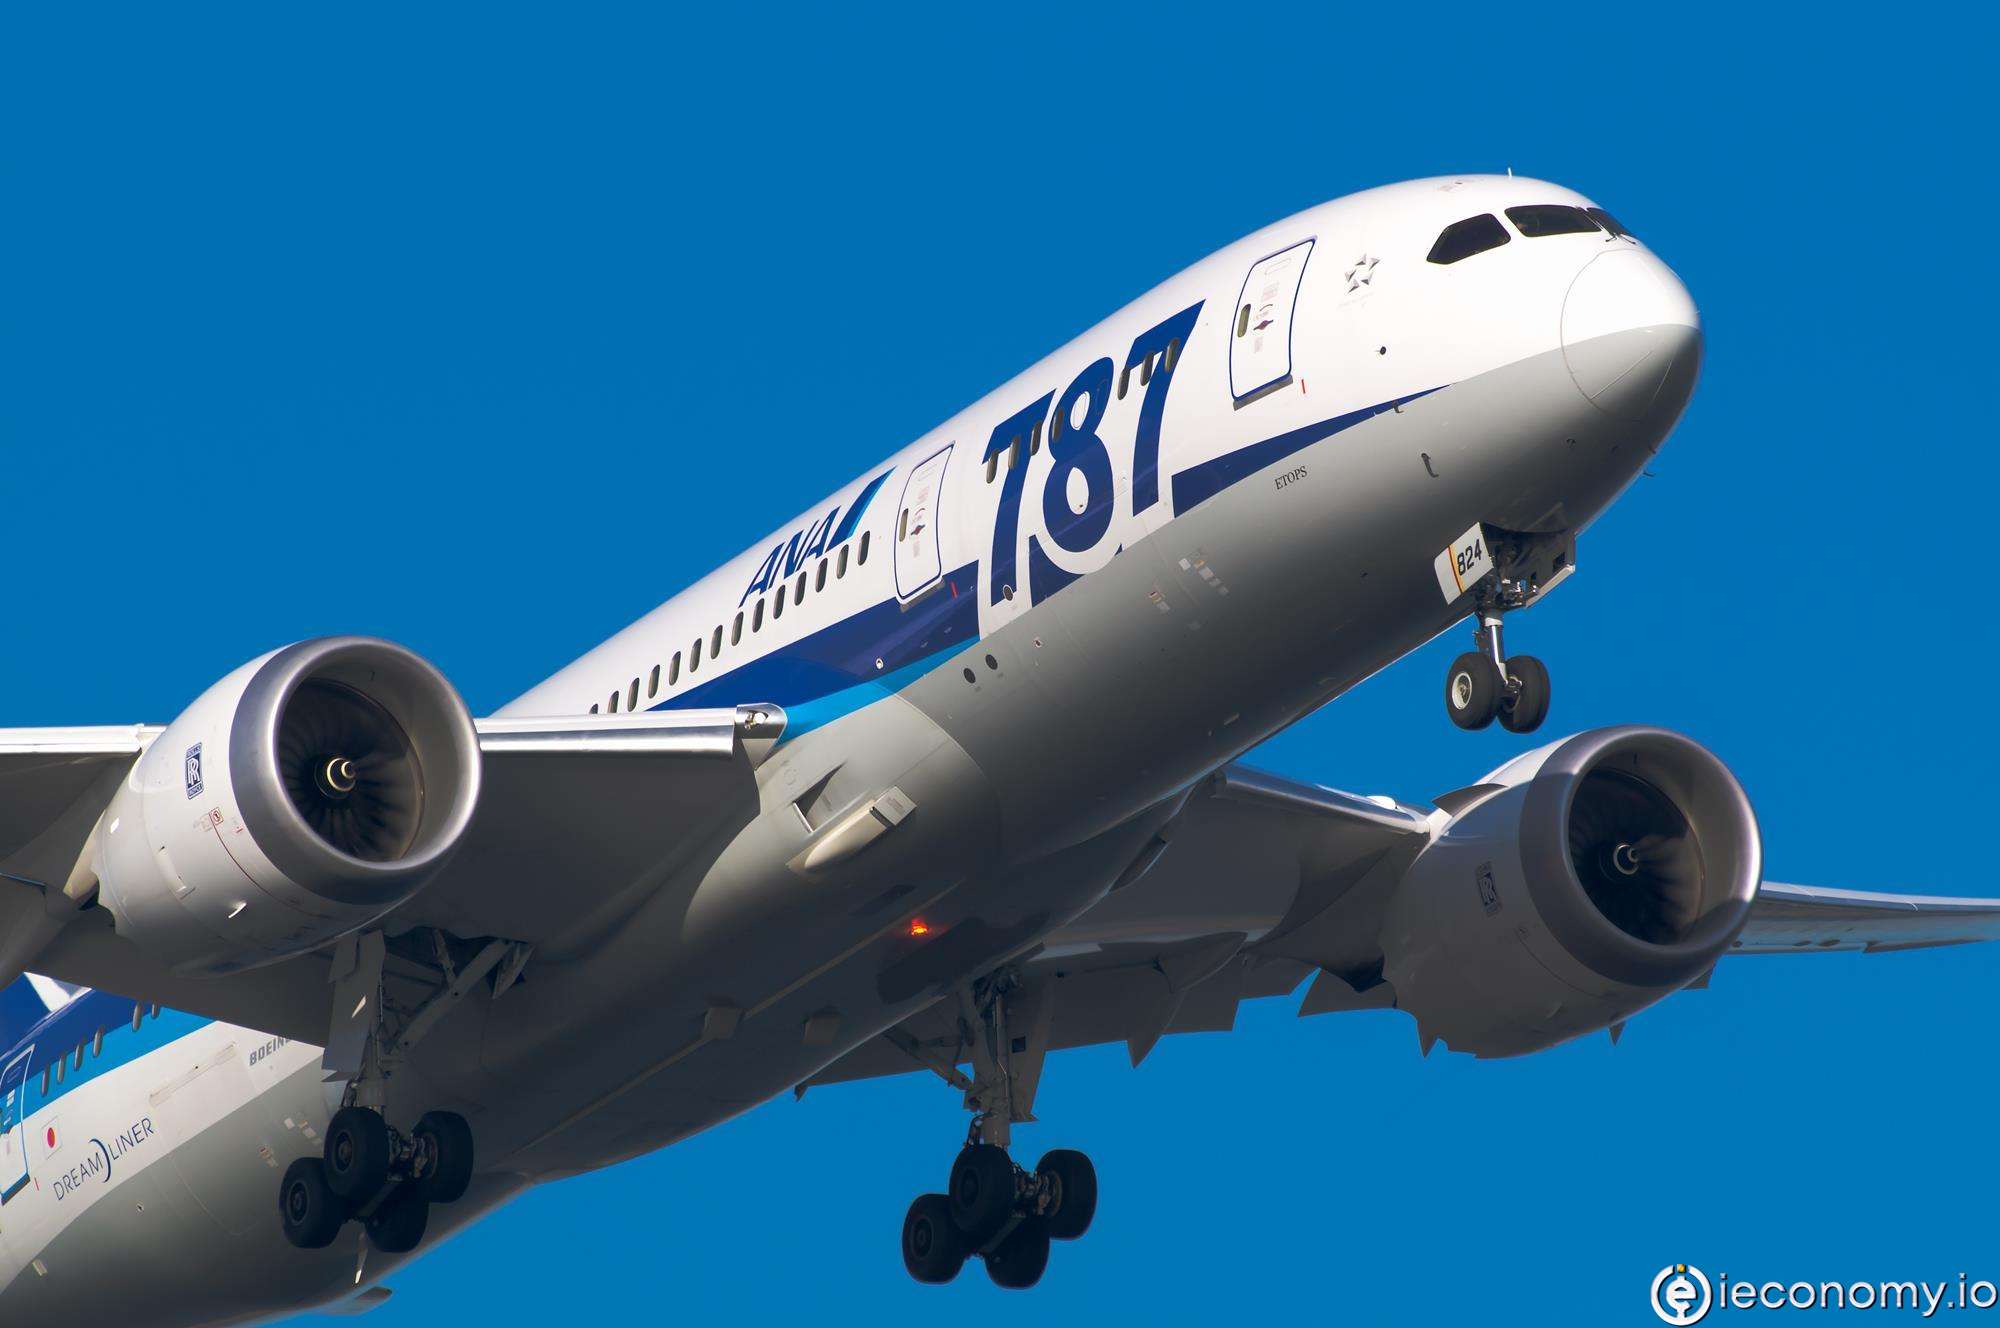 787 Dreamliner is currently causing problems for Boeing again